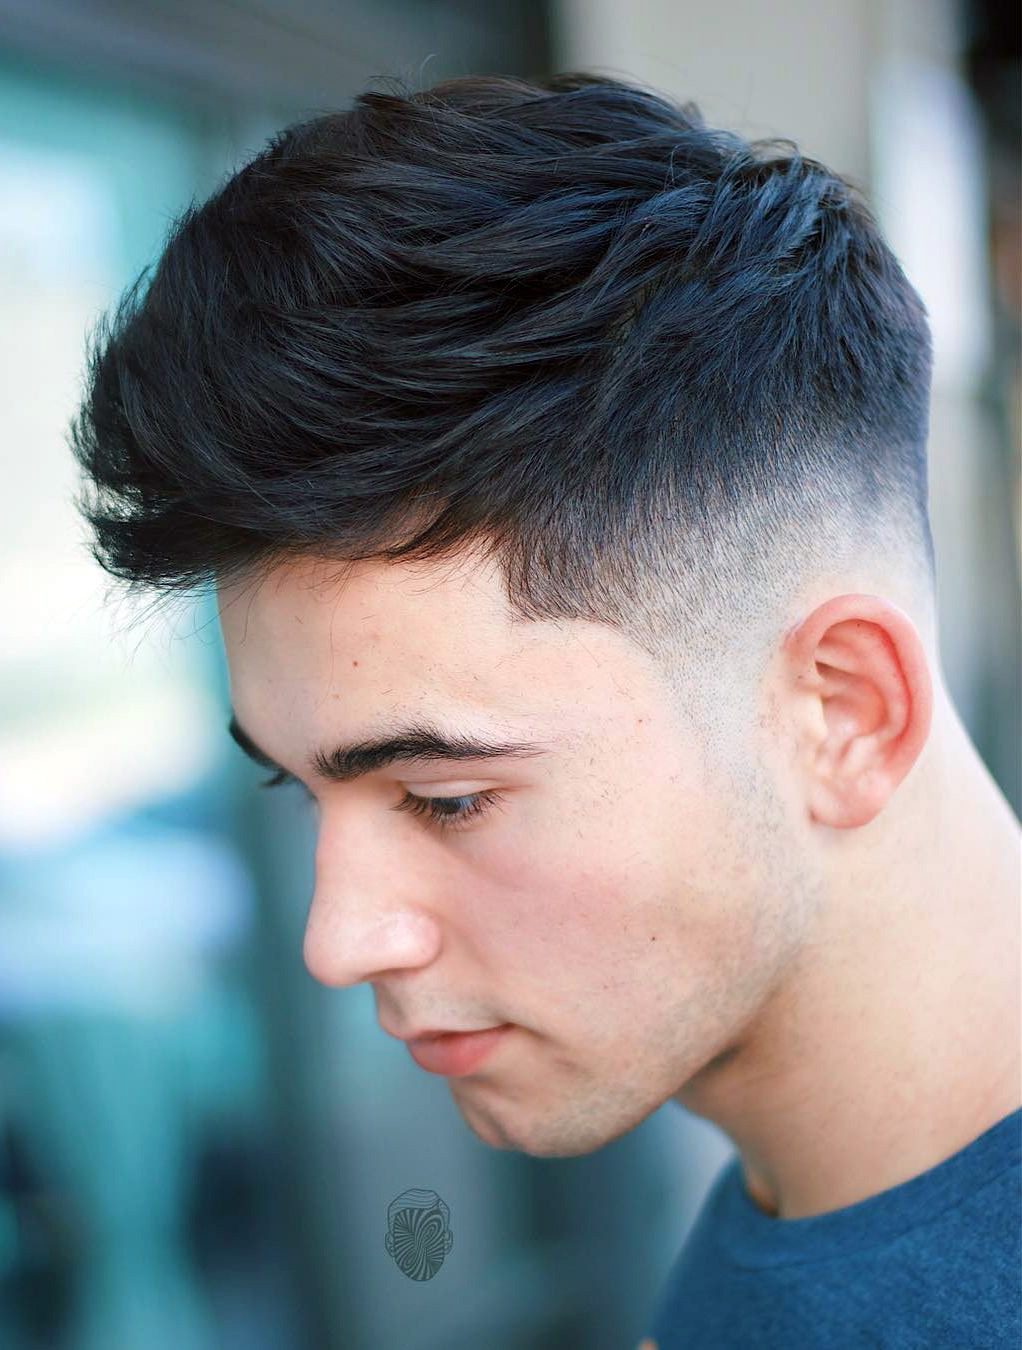 101 Best Hairstyles For Teenage Boys The Ultimate Guide 2021 If you want to attend really high fashion ceremony then this style is perfect for you. 101 best hairstyles for teenage boys